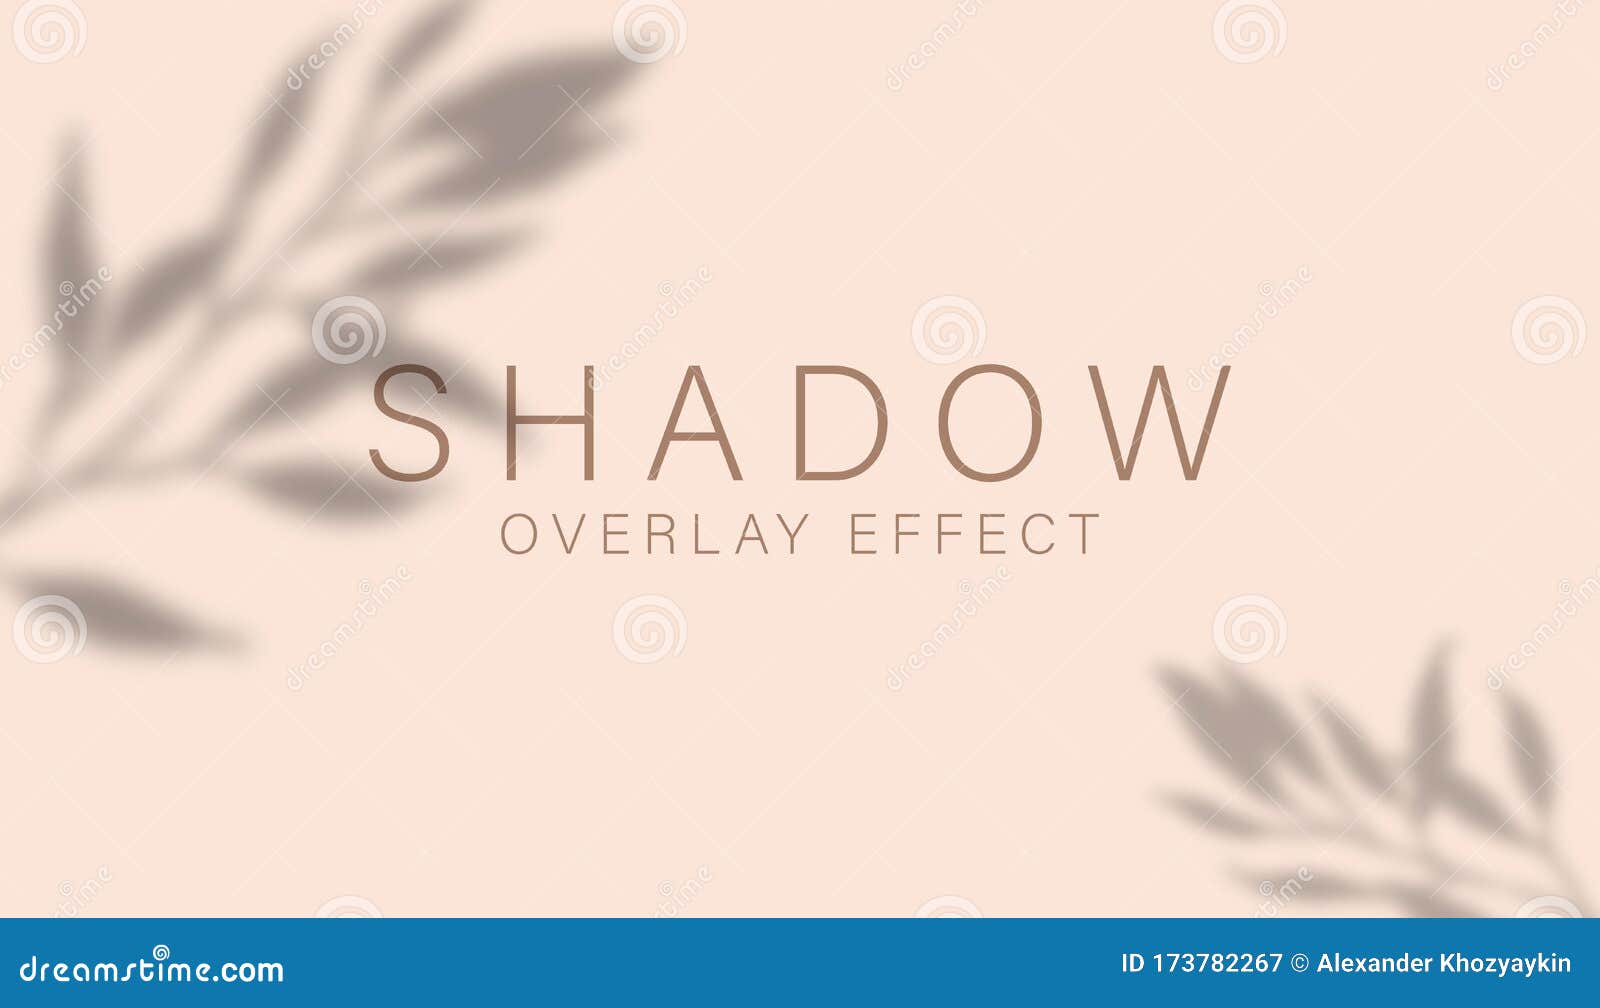 shadow overlay effect. transparent soft light and shadows from branches, plant, foliage and leaves. mockup of